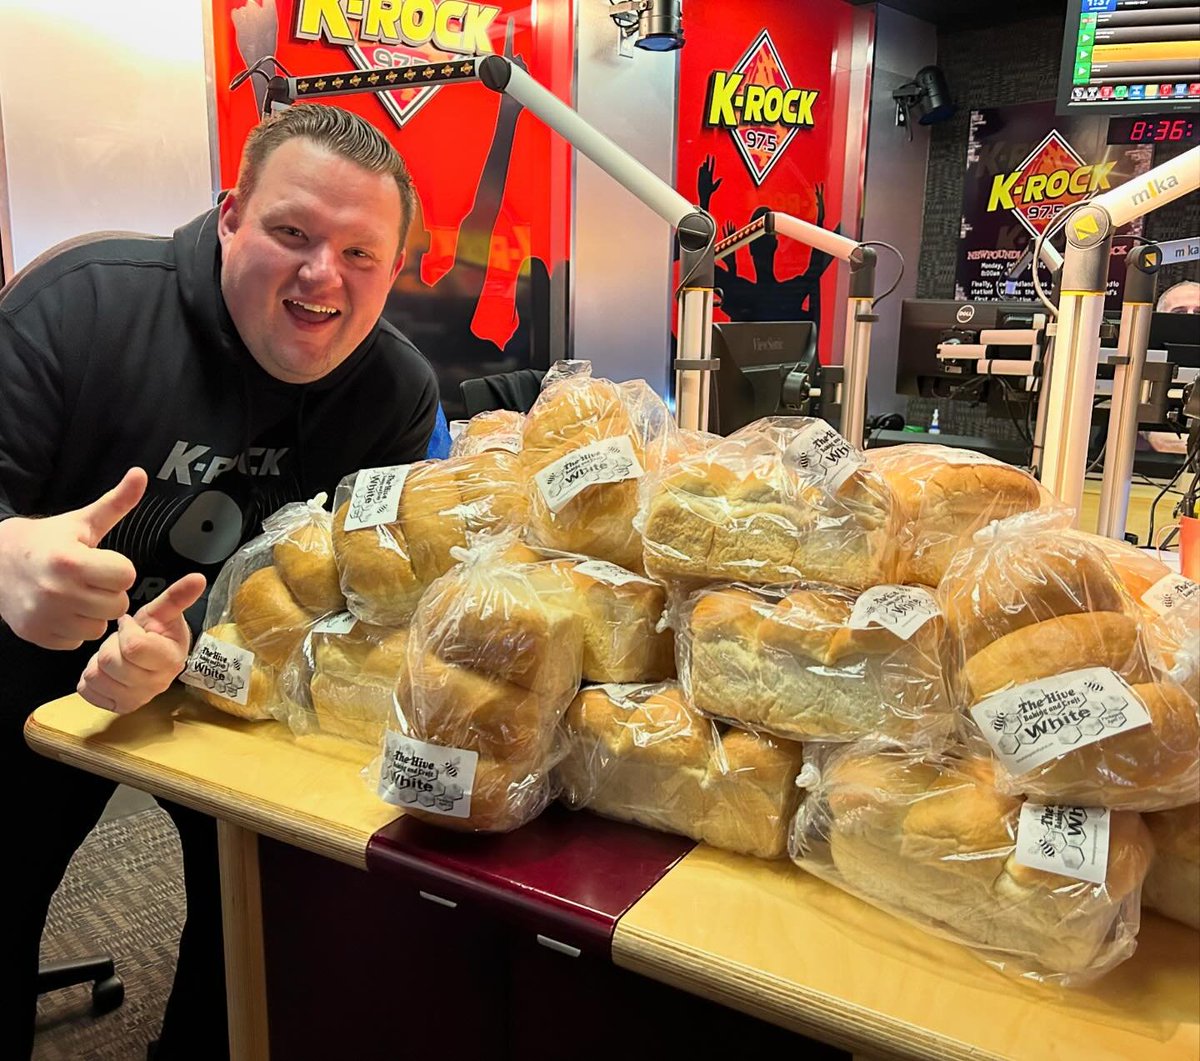 We gave Trotter 35 loaves of bread for his Birthday. What is the 1st thing he should make with his bread?? #ccj @candice_udle @JLaC975 @CampbellCritch